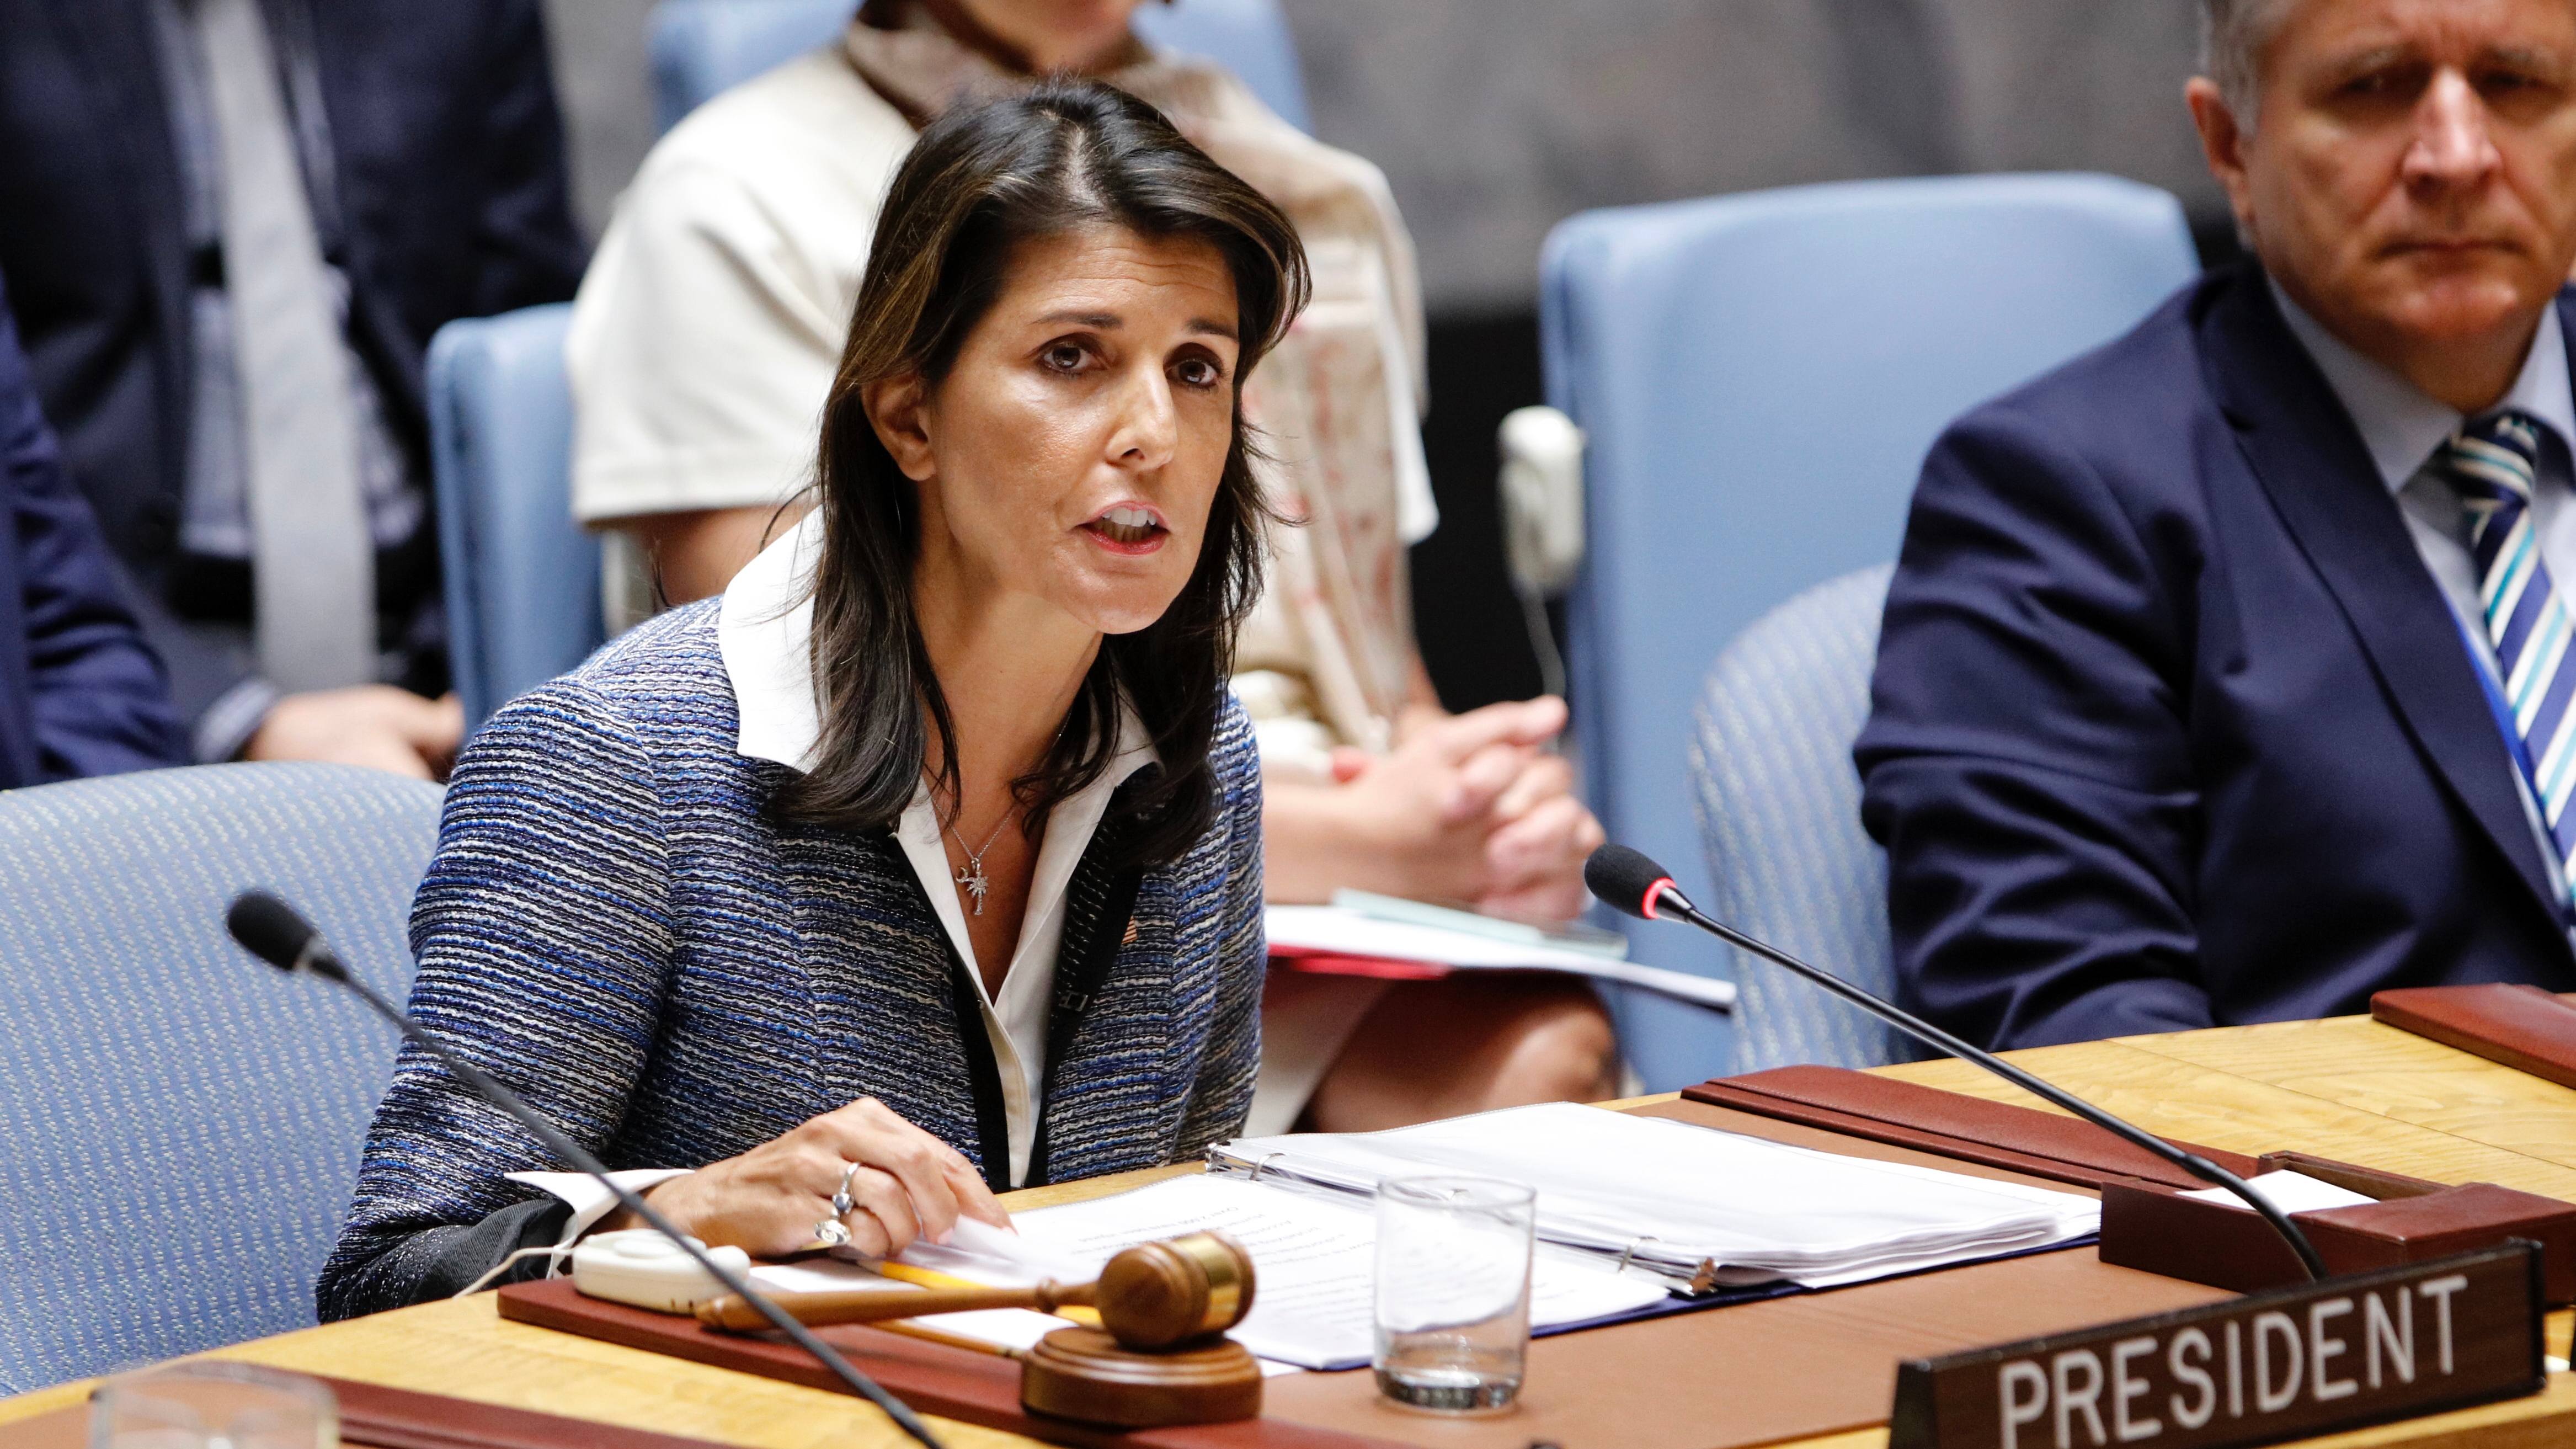 File photo shows Nikki Haley chairs a Security Council meeting at the UN headquarters in New York, September 5, 2018. /Xinhua